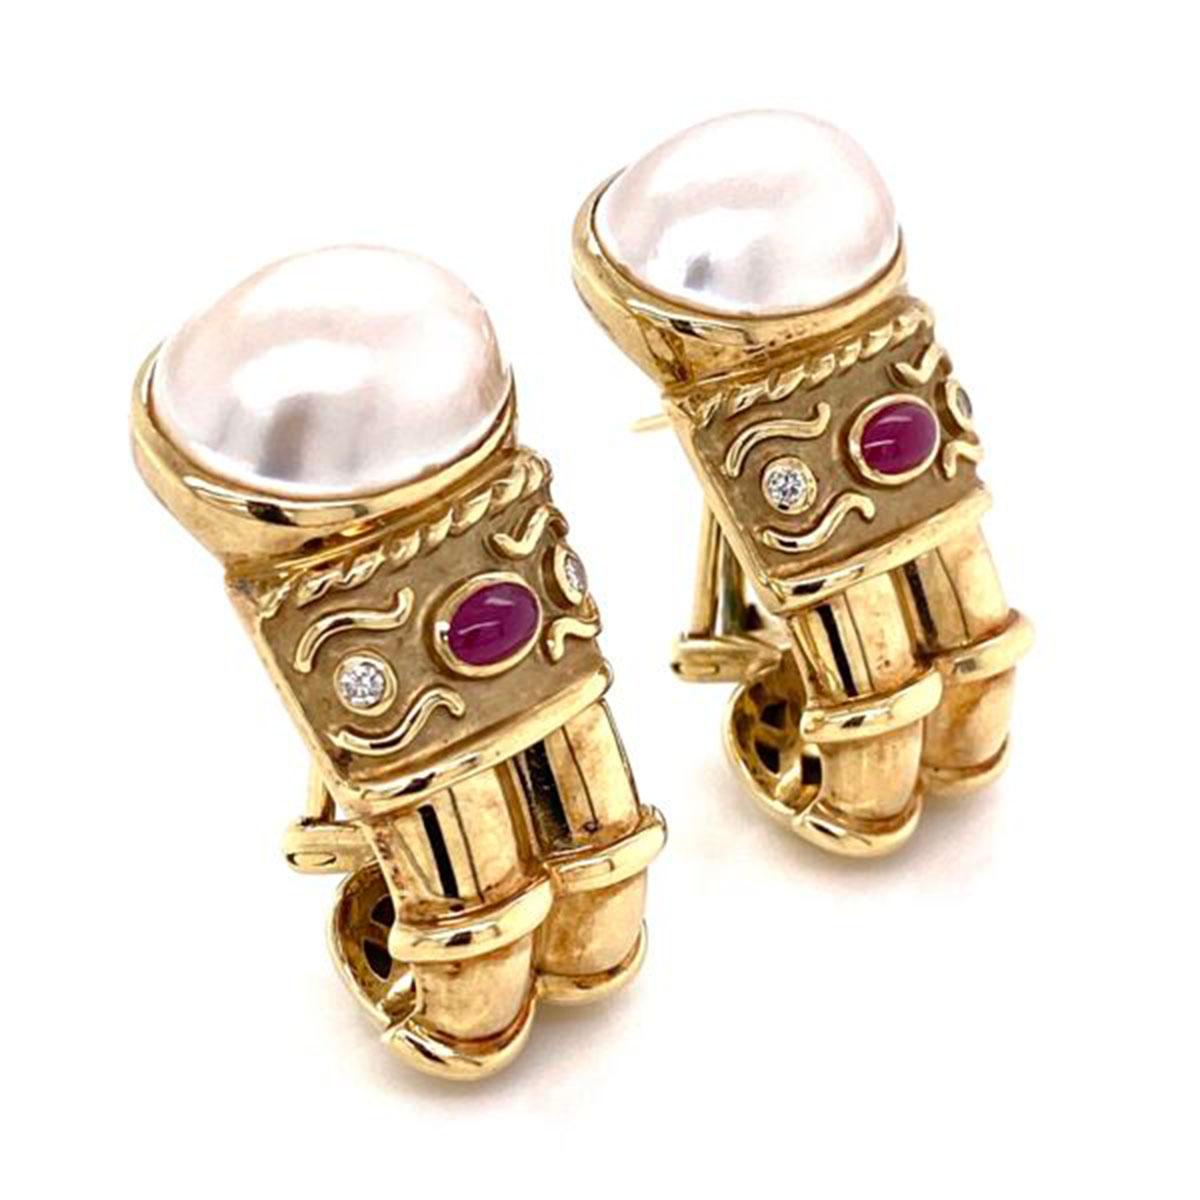 Awesome and finely detailed Iconic DENOIR Clip Earrings. Each earring set with a Pearl, Rubies and Diamonds, approx. 0.10 total carat weight. Hand crafted in 14 Karat Gold and Signed: DENOIR 585. The earrings are in excellent condition and were